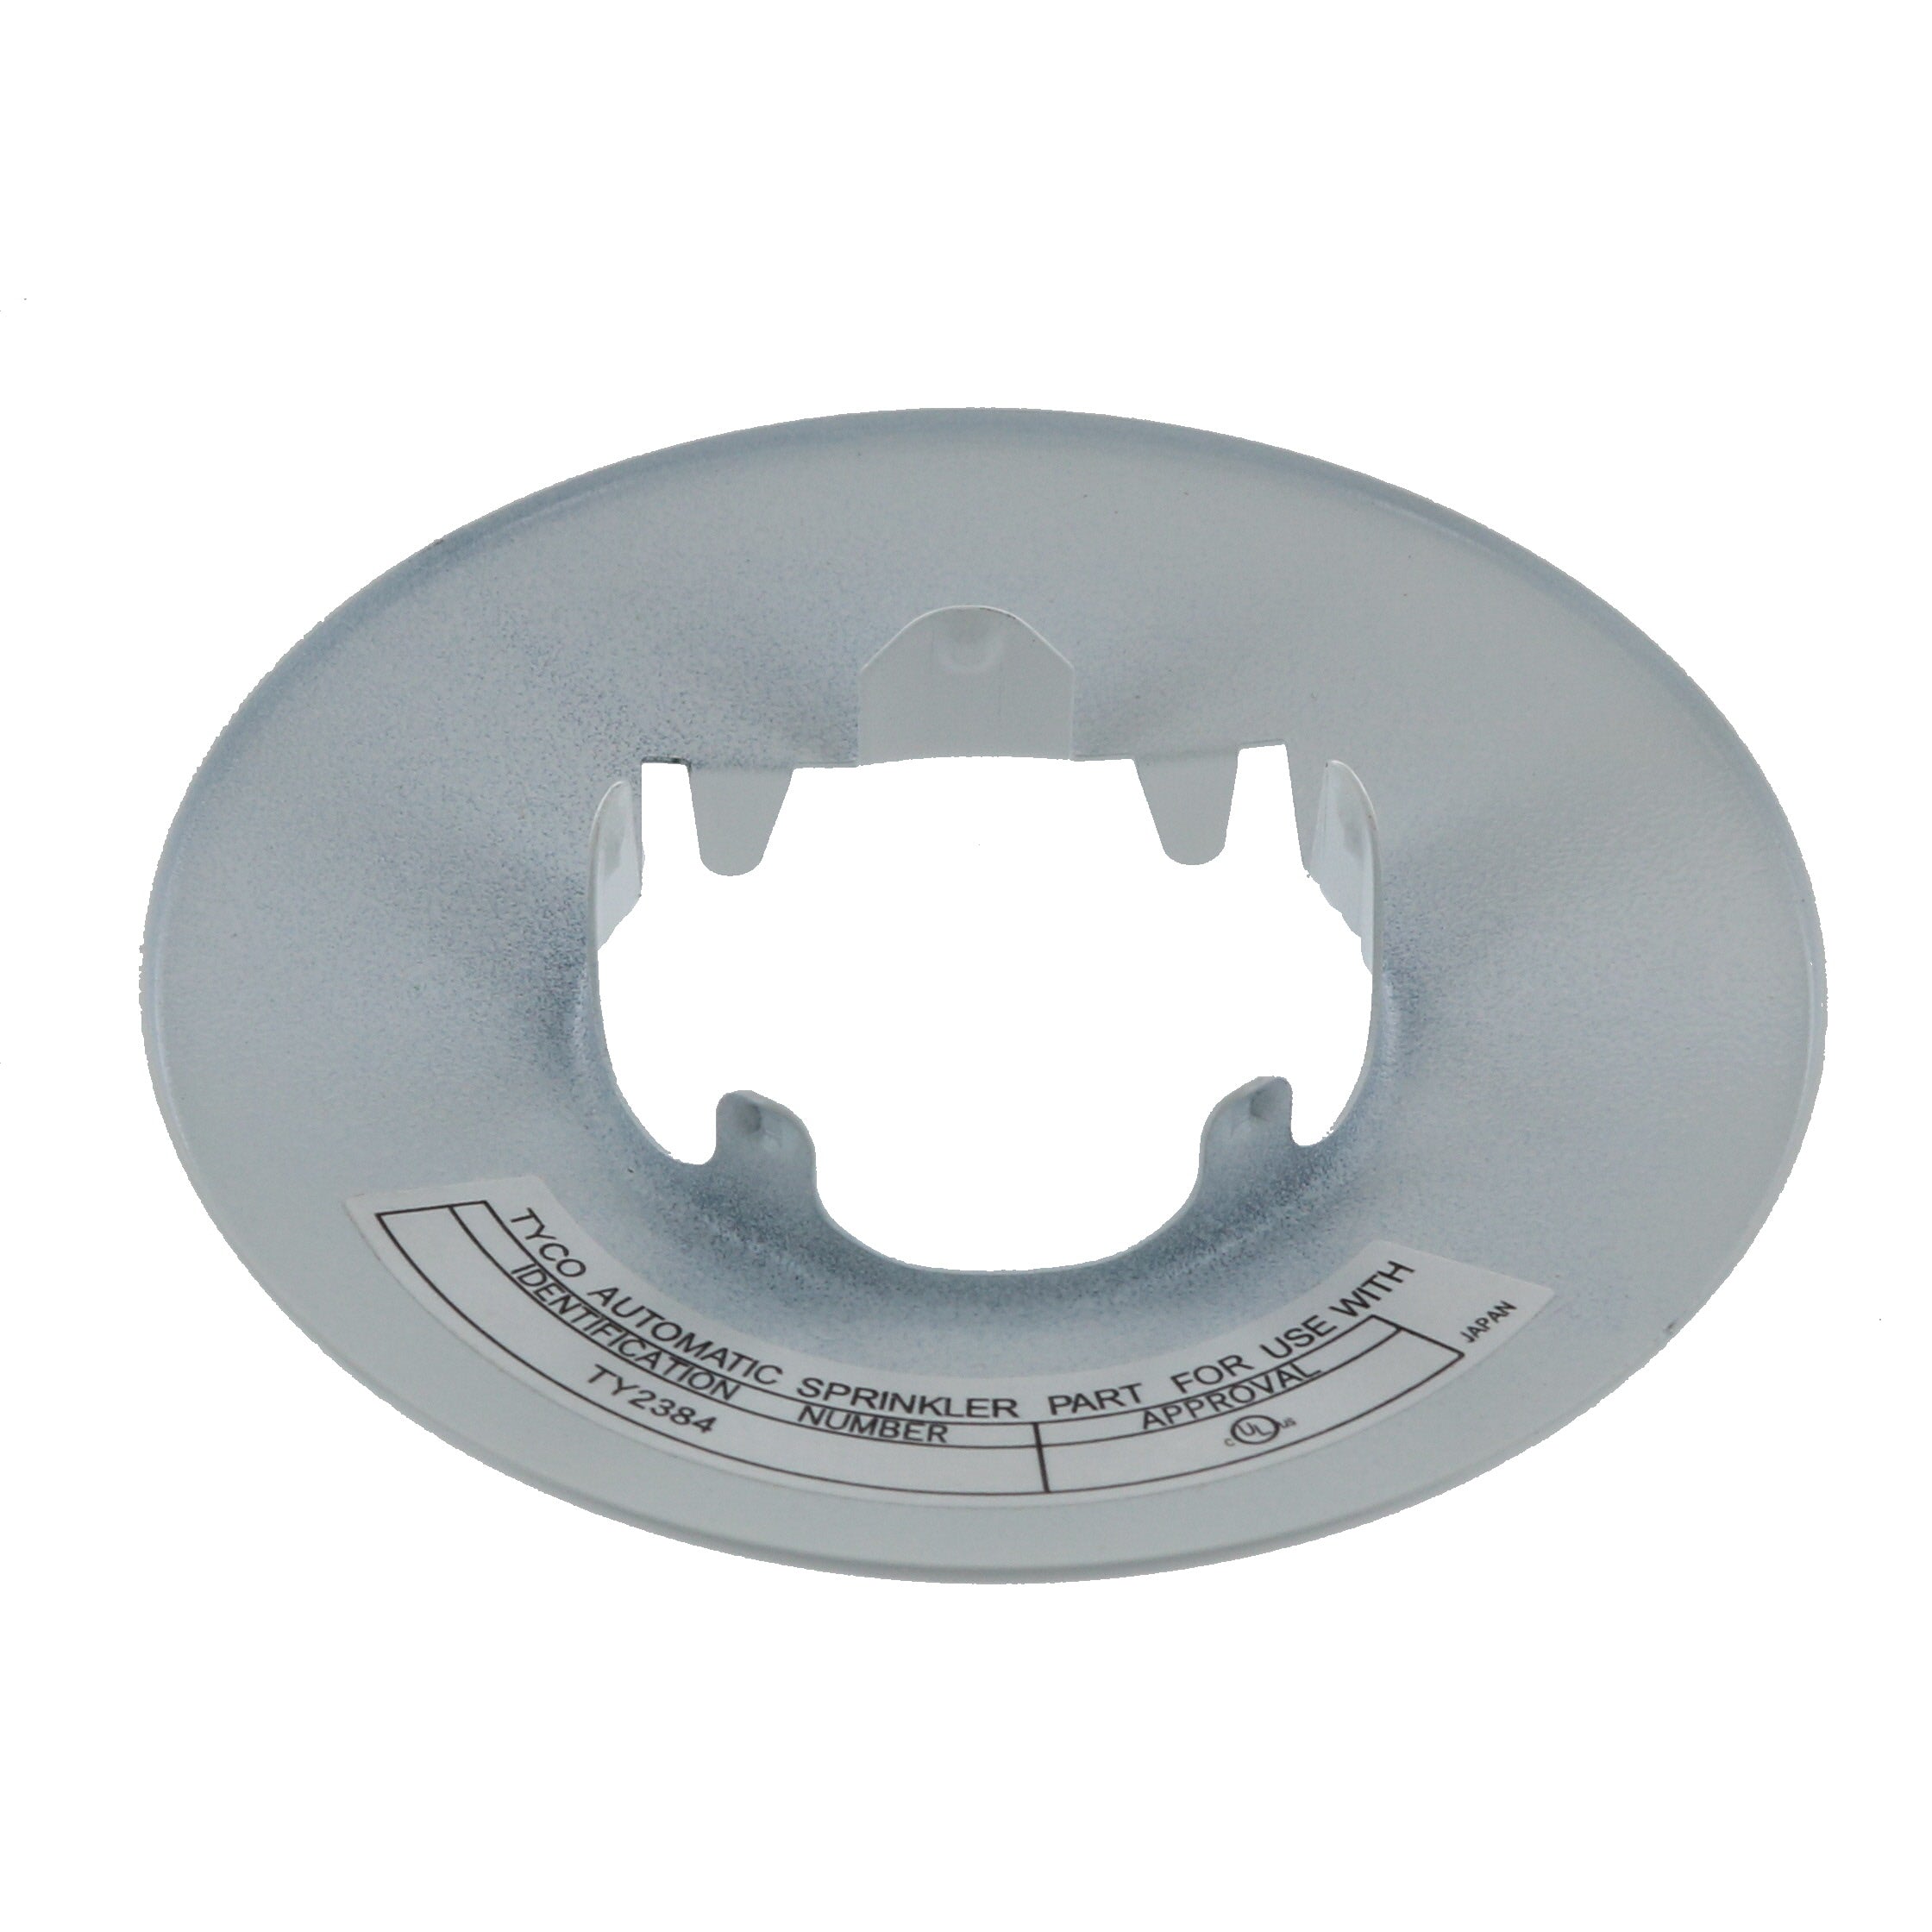 Tyco LFII Flush Horizontal Sidewall TY-QRF Escutcheon 1 Piece - Available In Multiple Colors - W1007